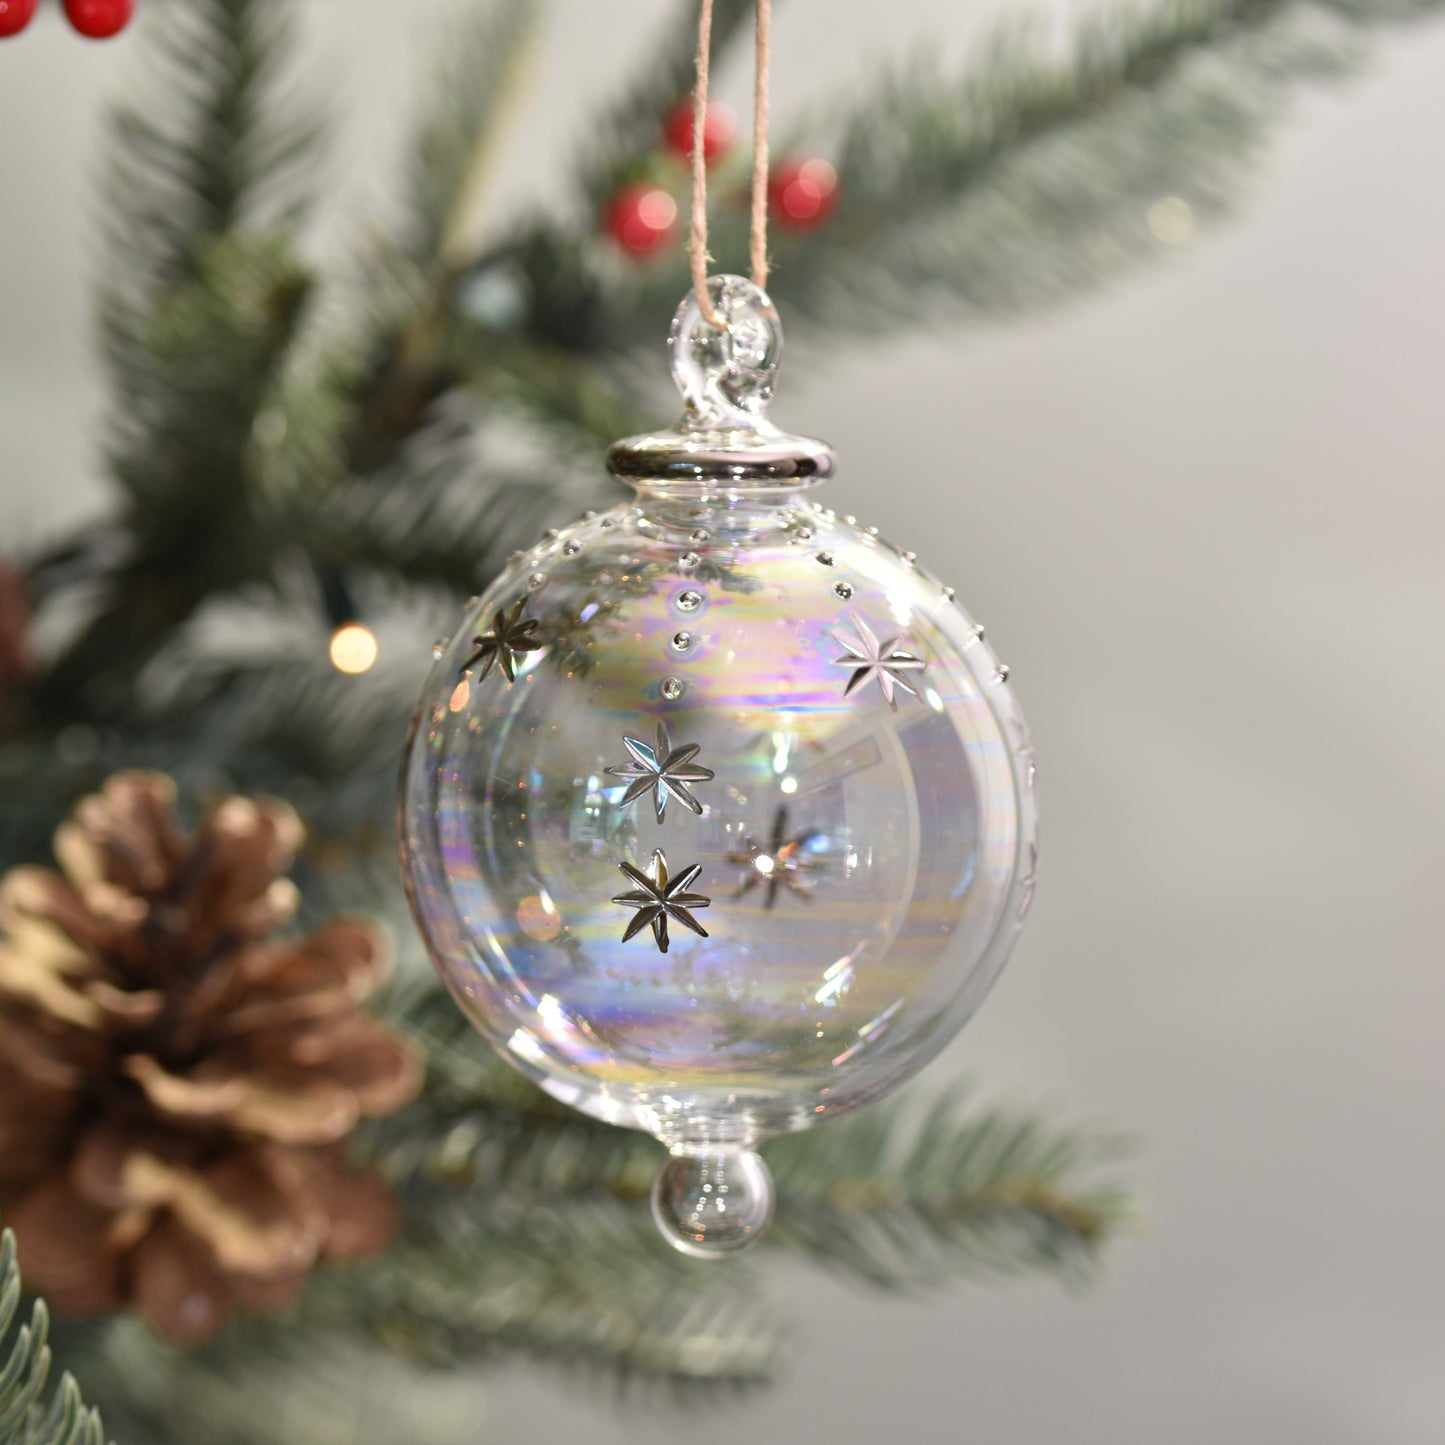 Snowfall Handblown Glass Bauble - Clear & Pearlescent - Large